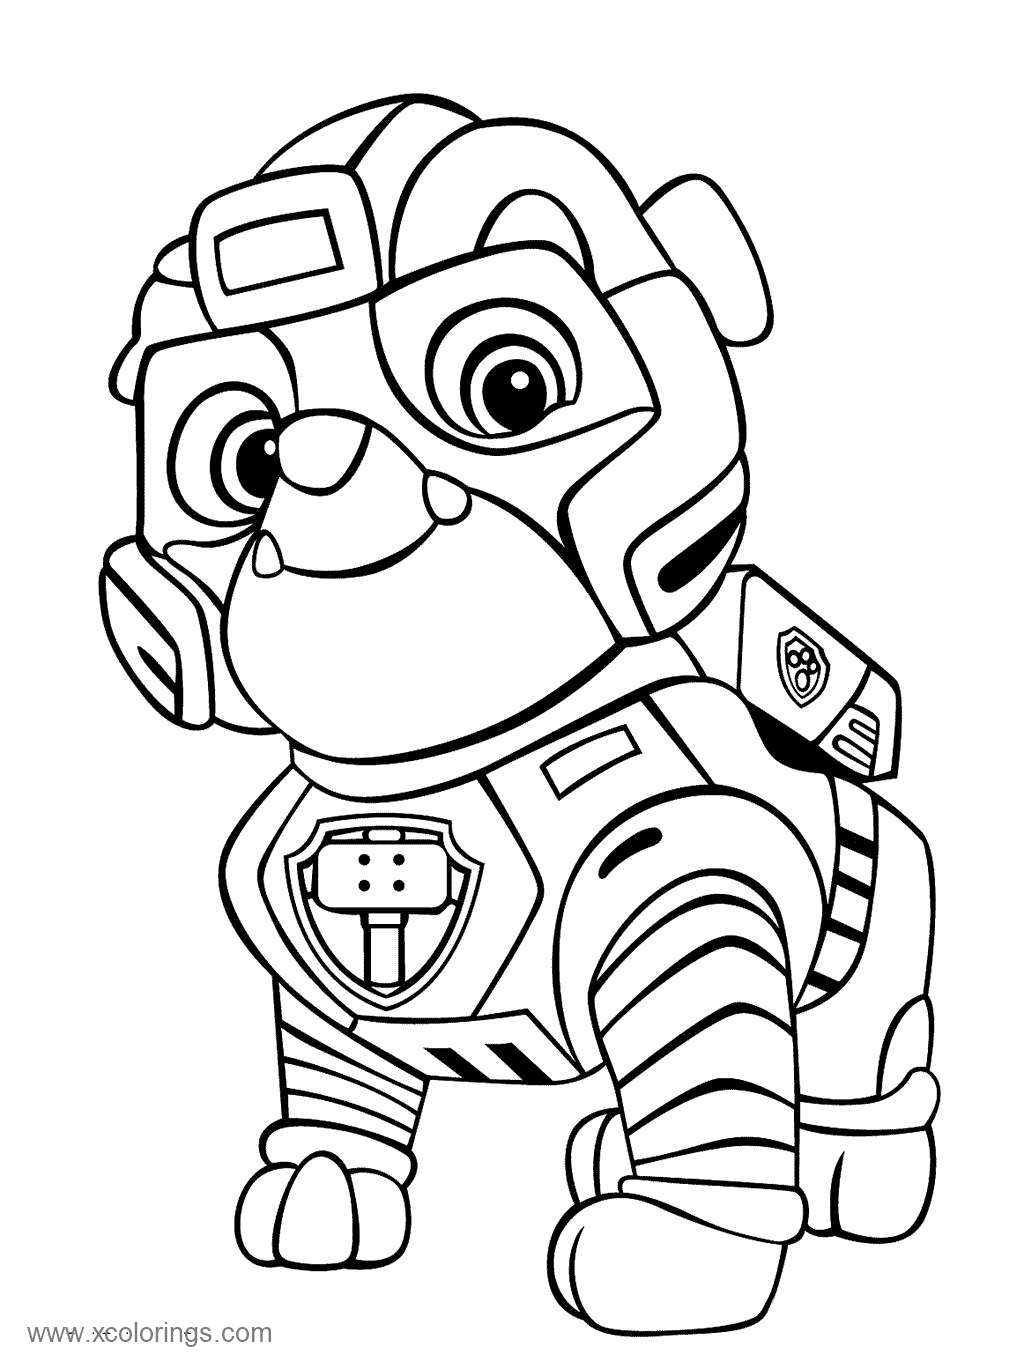 Paw Patrol Coloring Pages FREE Printable 3